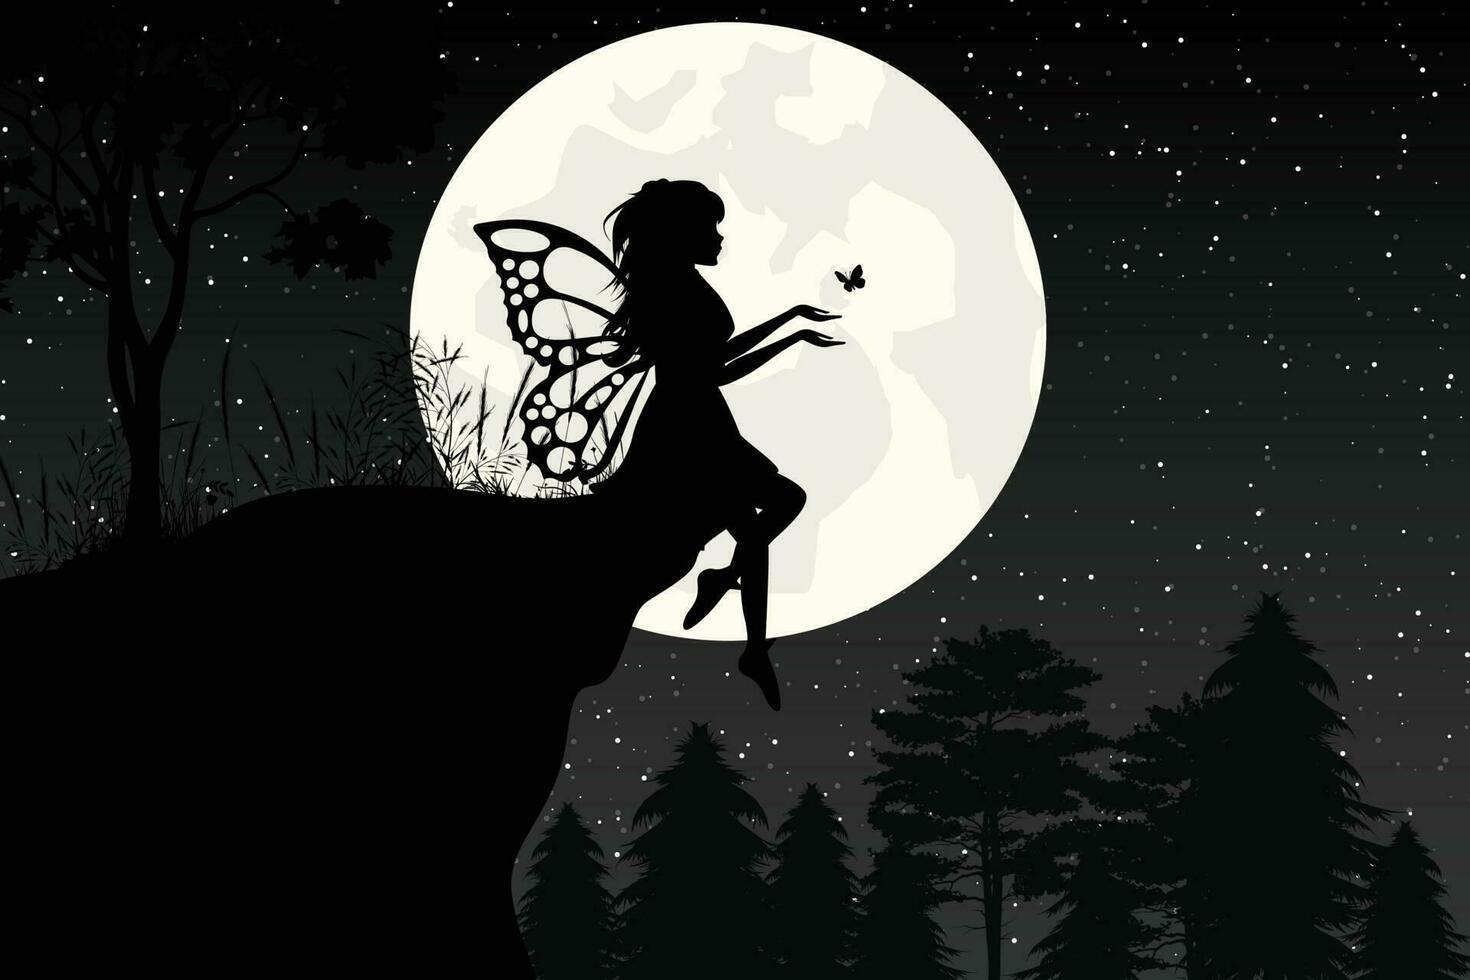 cute fairy and moon silhouette illustration graphic vector